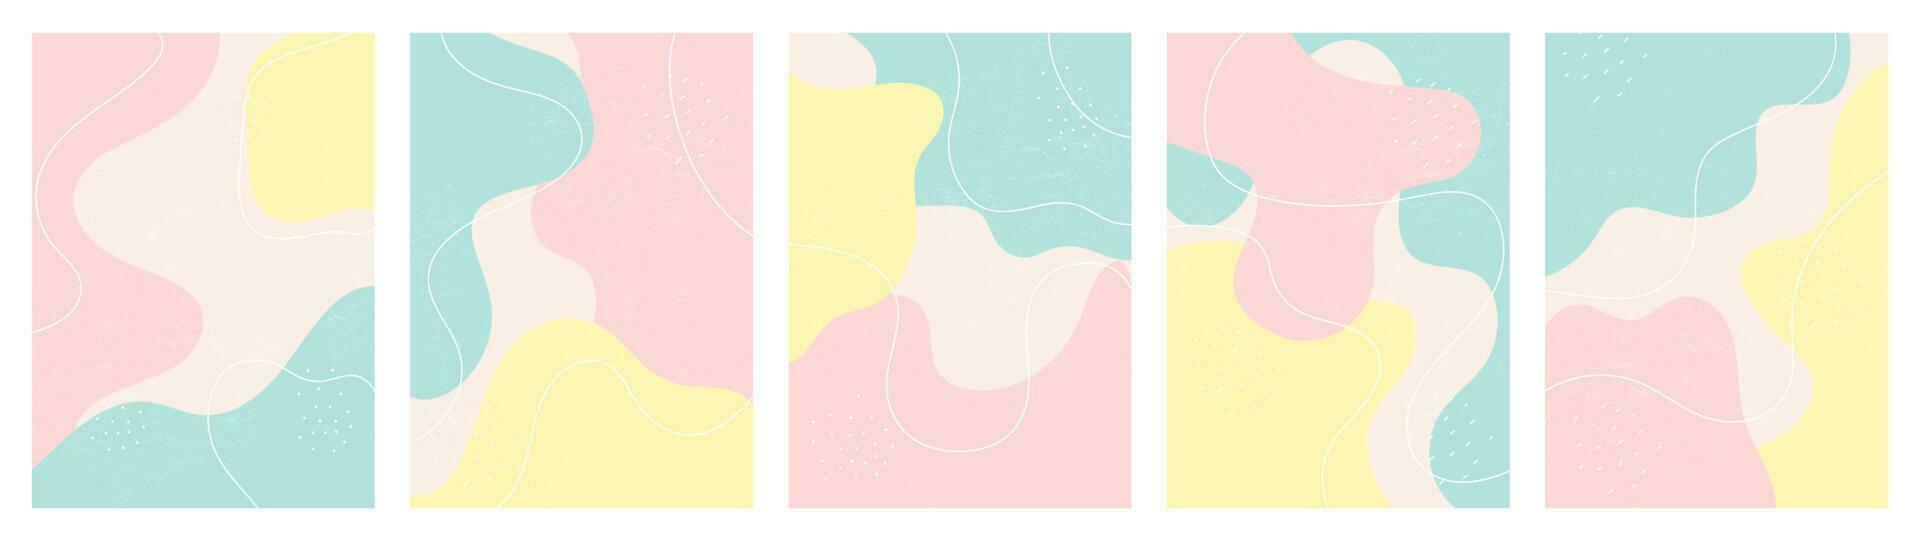 Set Of Abstract Background. Hand Drawn Various Shapes And Doodles. Modern Trendy Vector Illustration. Each Background Is Isolated. Pastel Shades